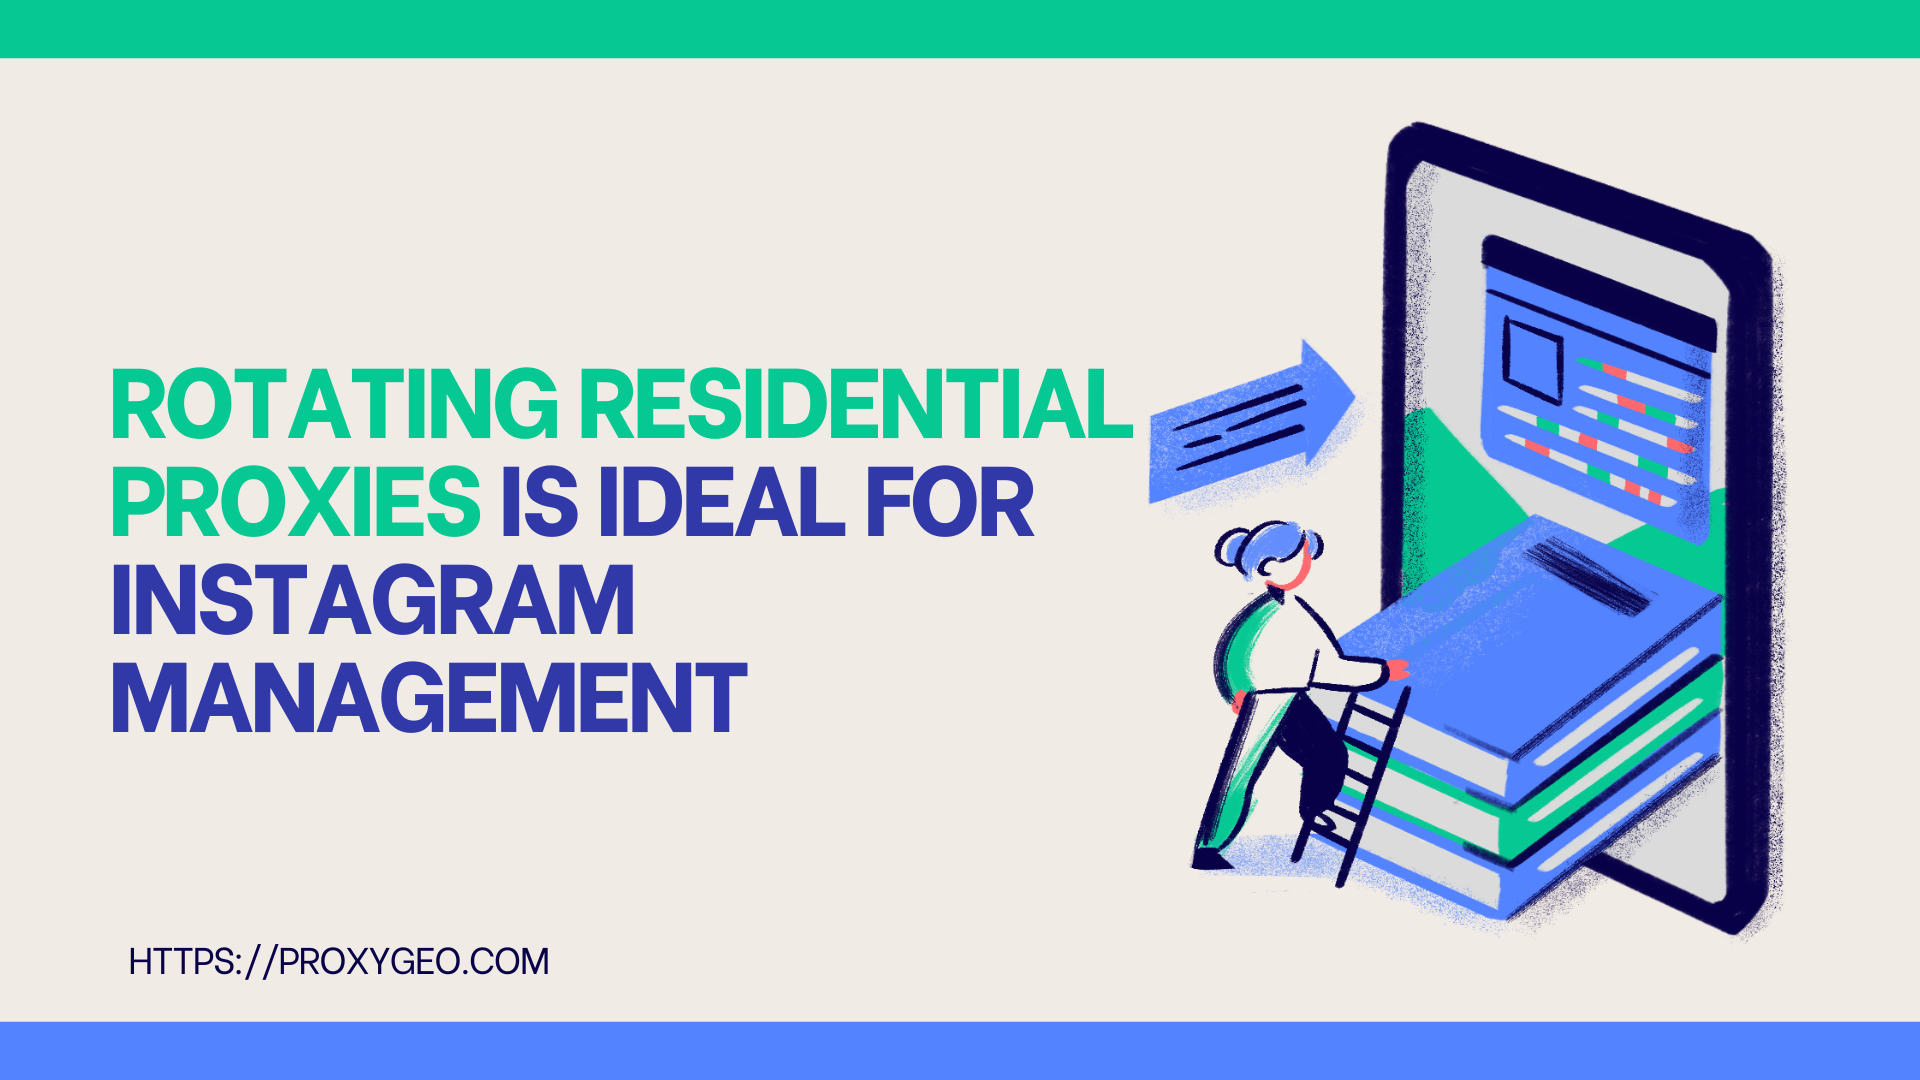 Are Rotating Residential Proxies Ideal for Instagram Management? Finding the Optimal Solution